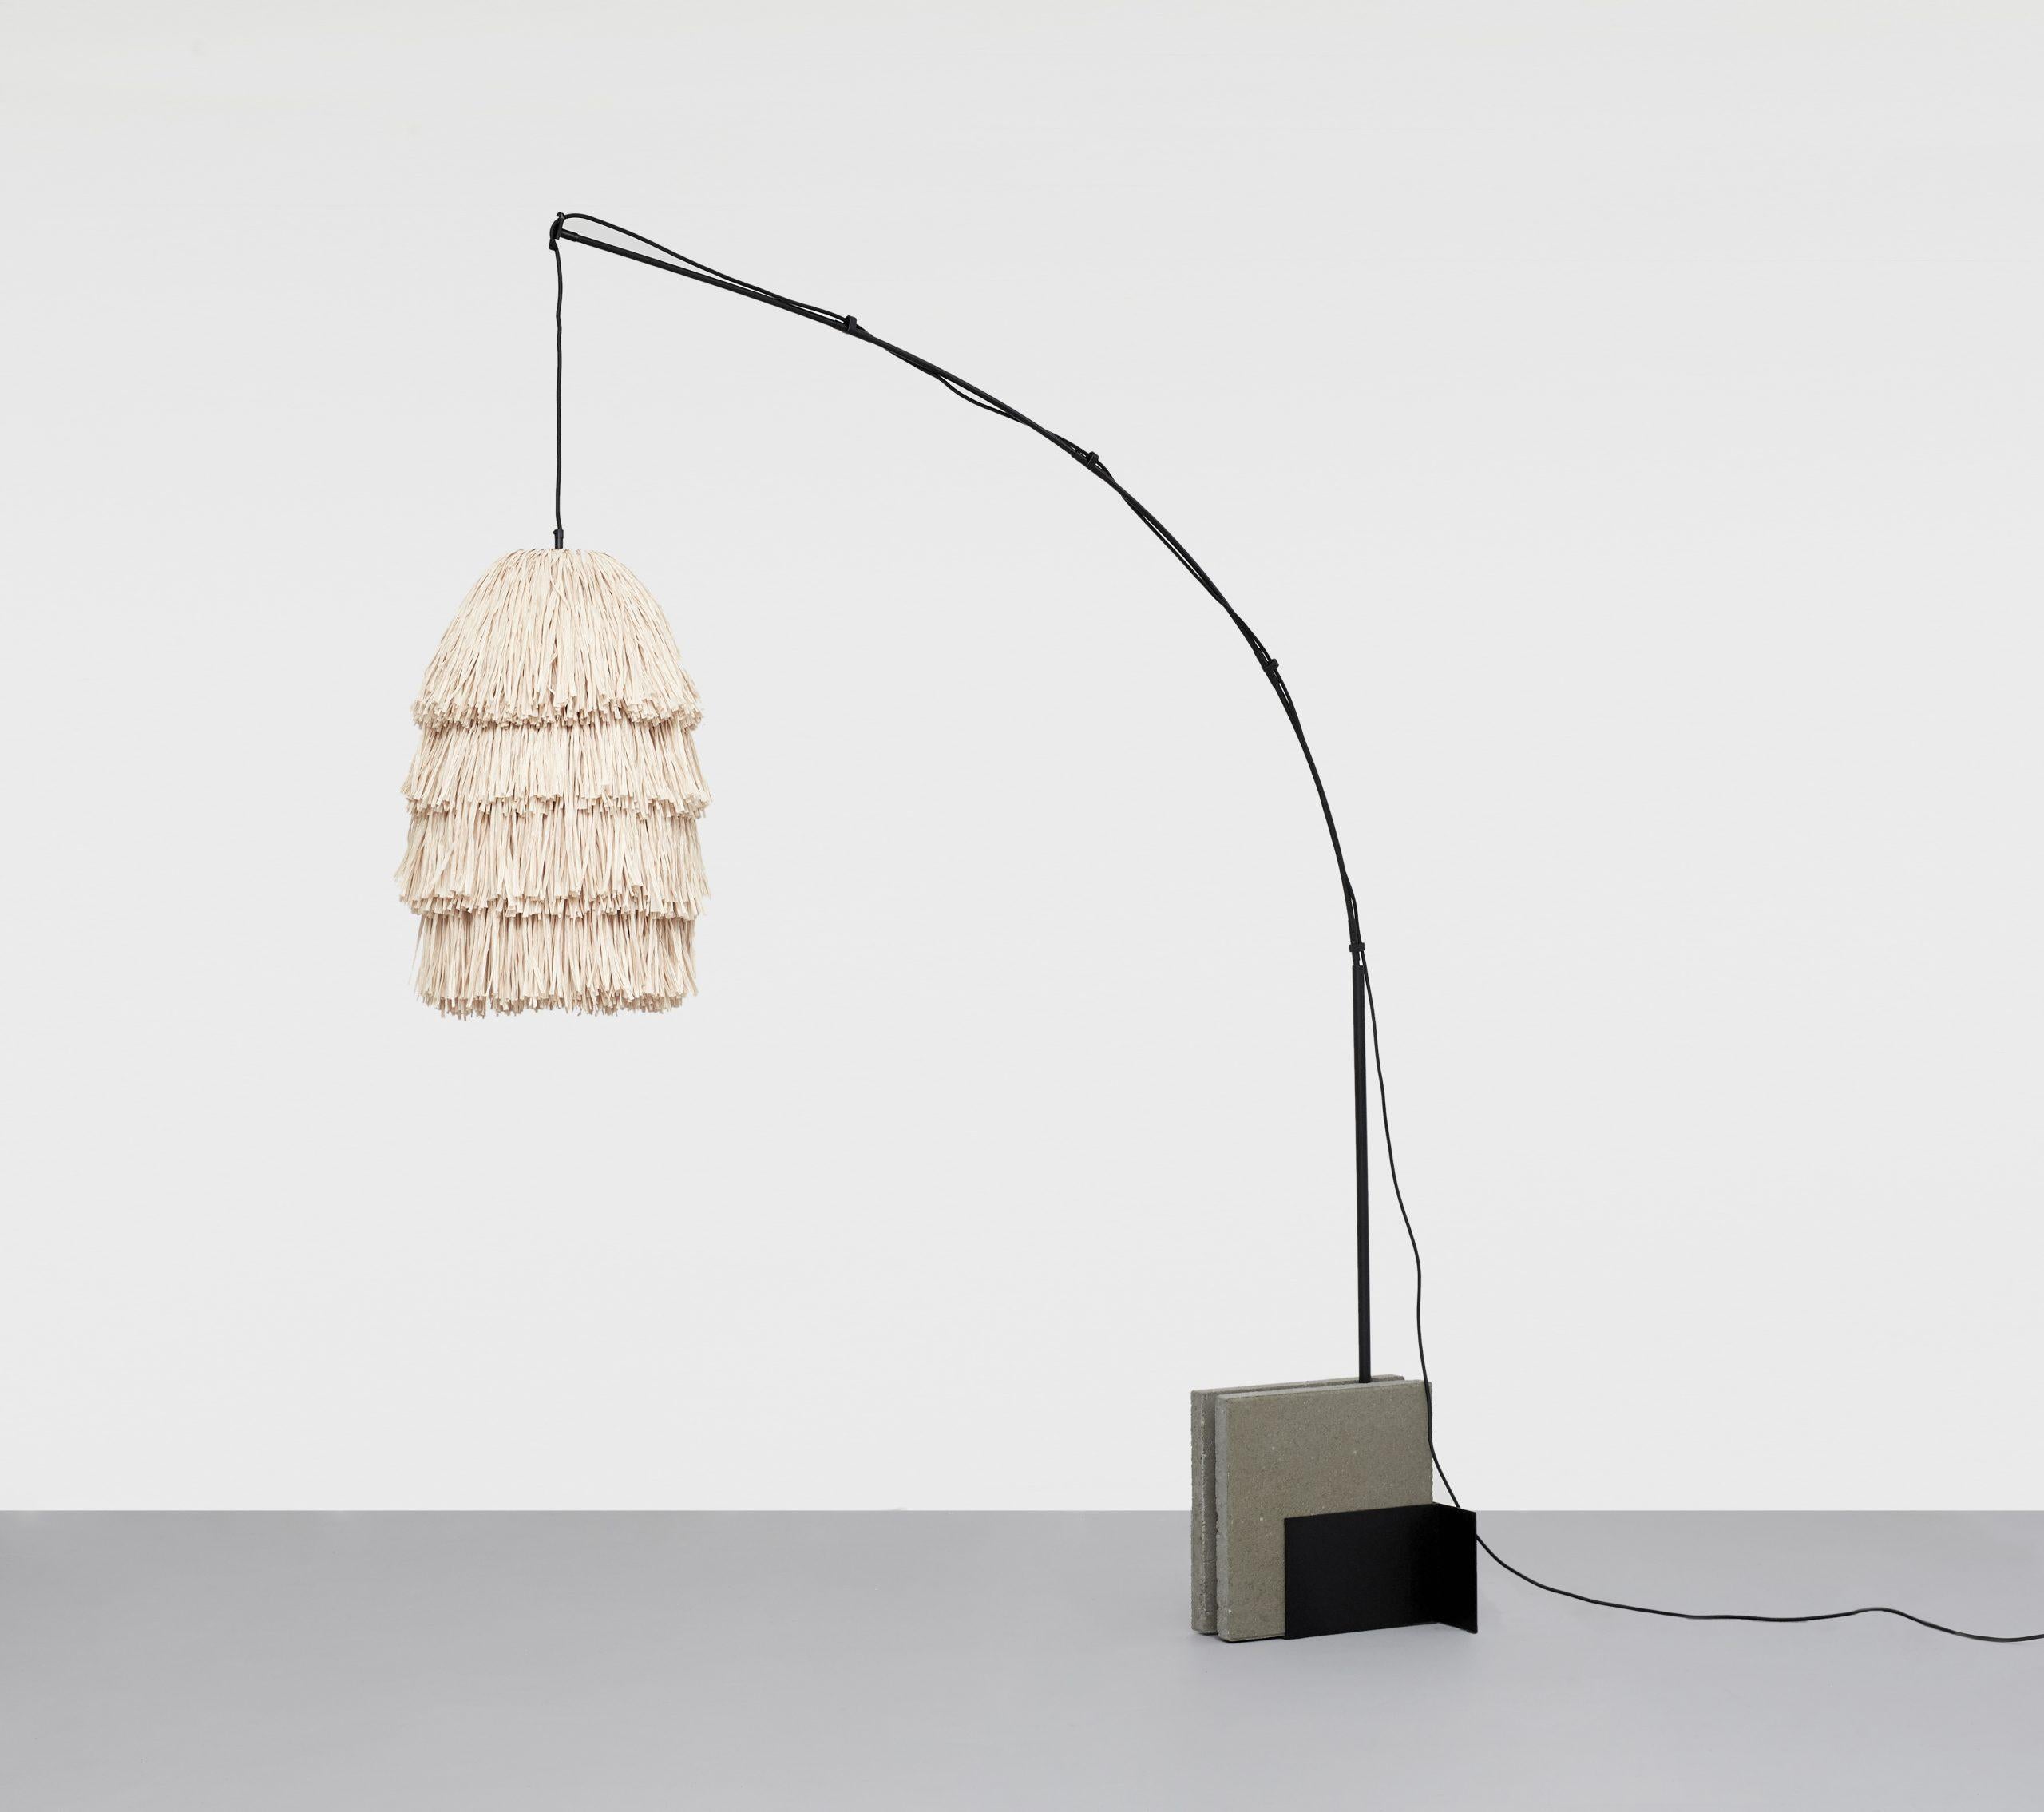 Beige Fran M stand floor lamp by Llot Llov
Handcrafted light object
Dimensions: D 45 x W 205.8 x H 250 cm
Materials: raffia fringes, glass fiber, steel, concrete
Colour: beige
Also available in green, coral, black.

Another member of the FRAN